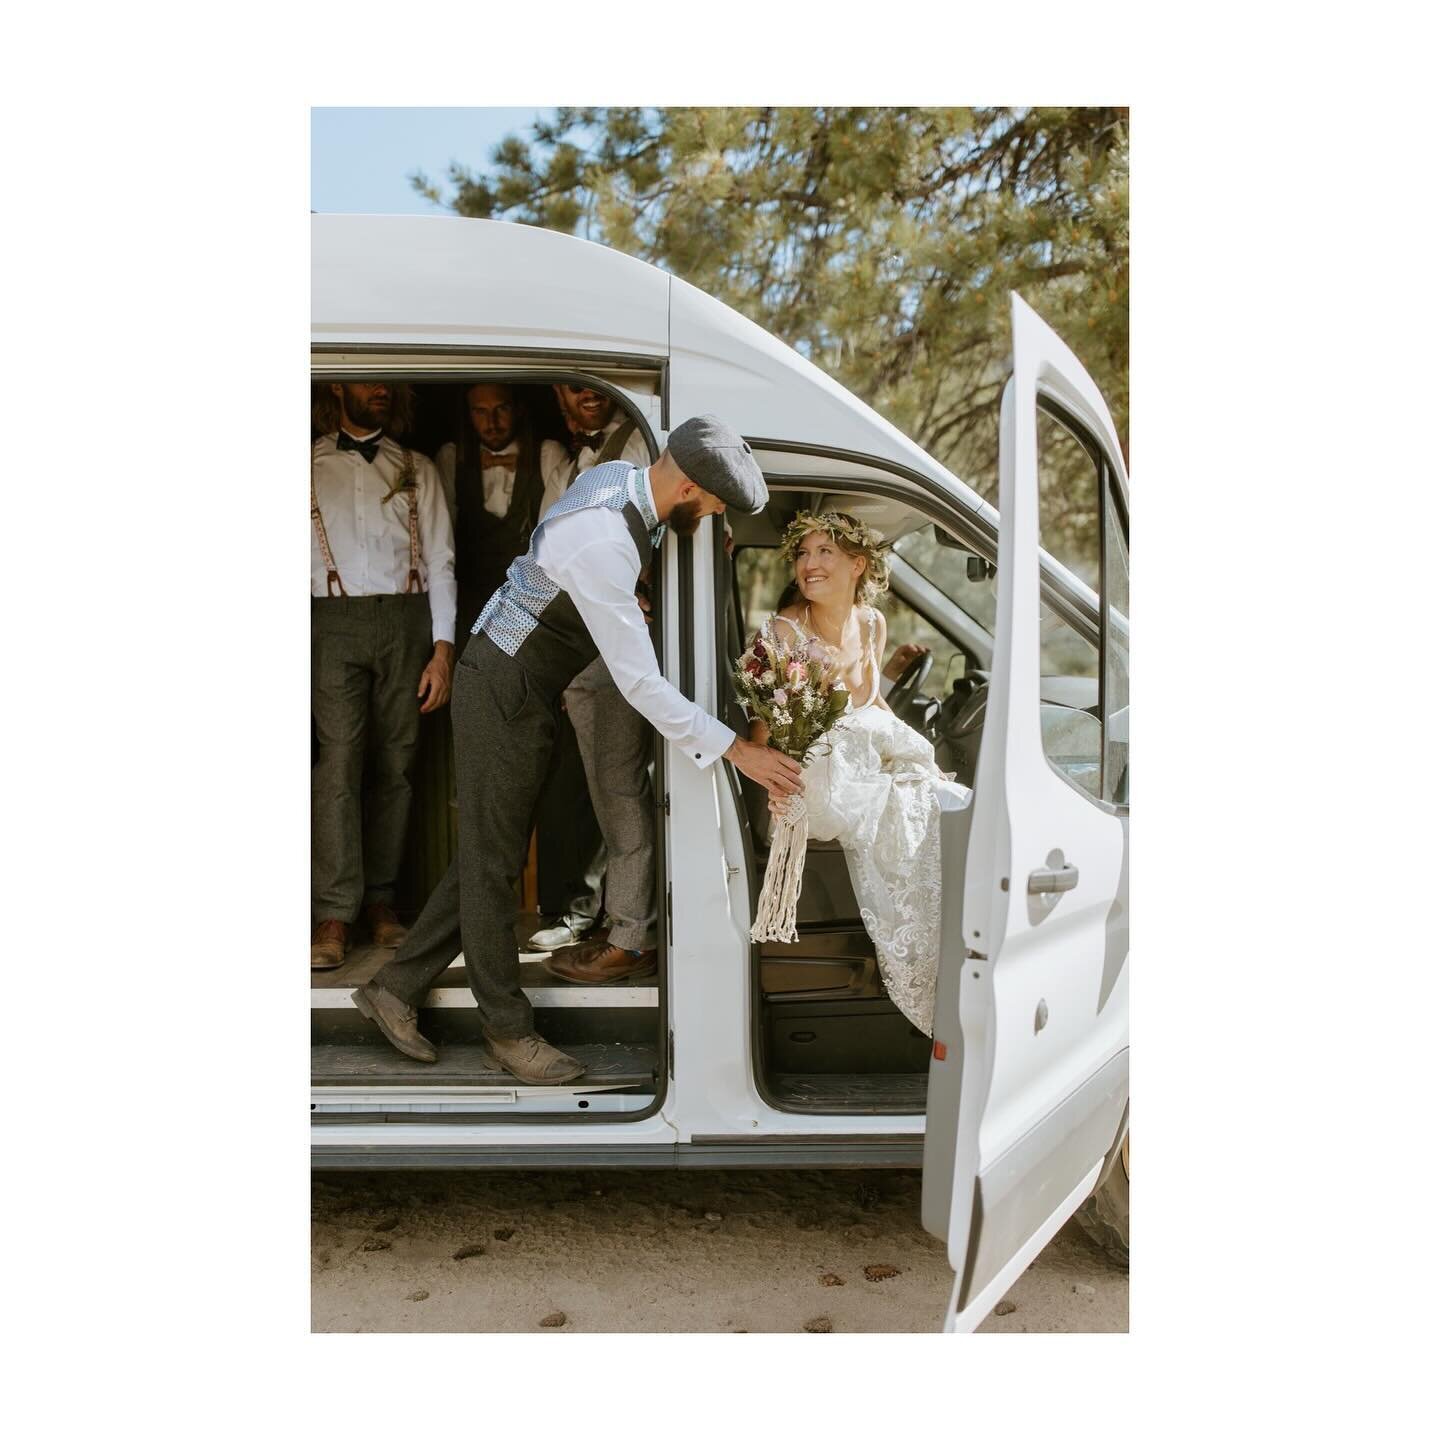 Carrie and Hayden and sweet glances out of their camper van on their wedding day 🤩